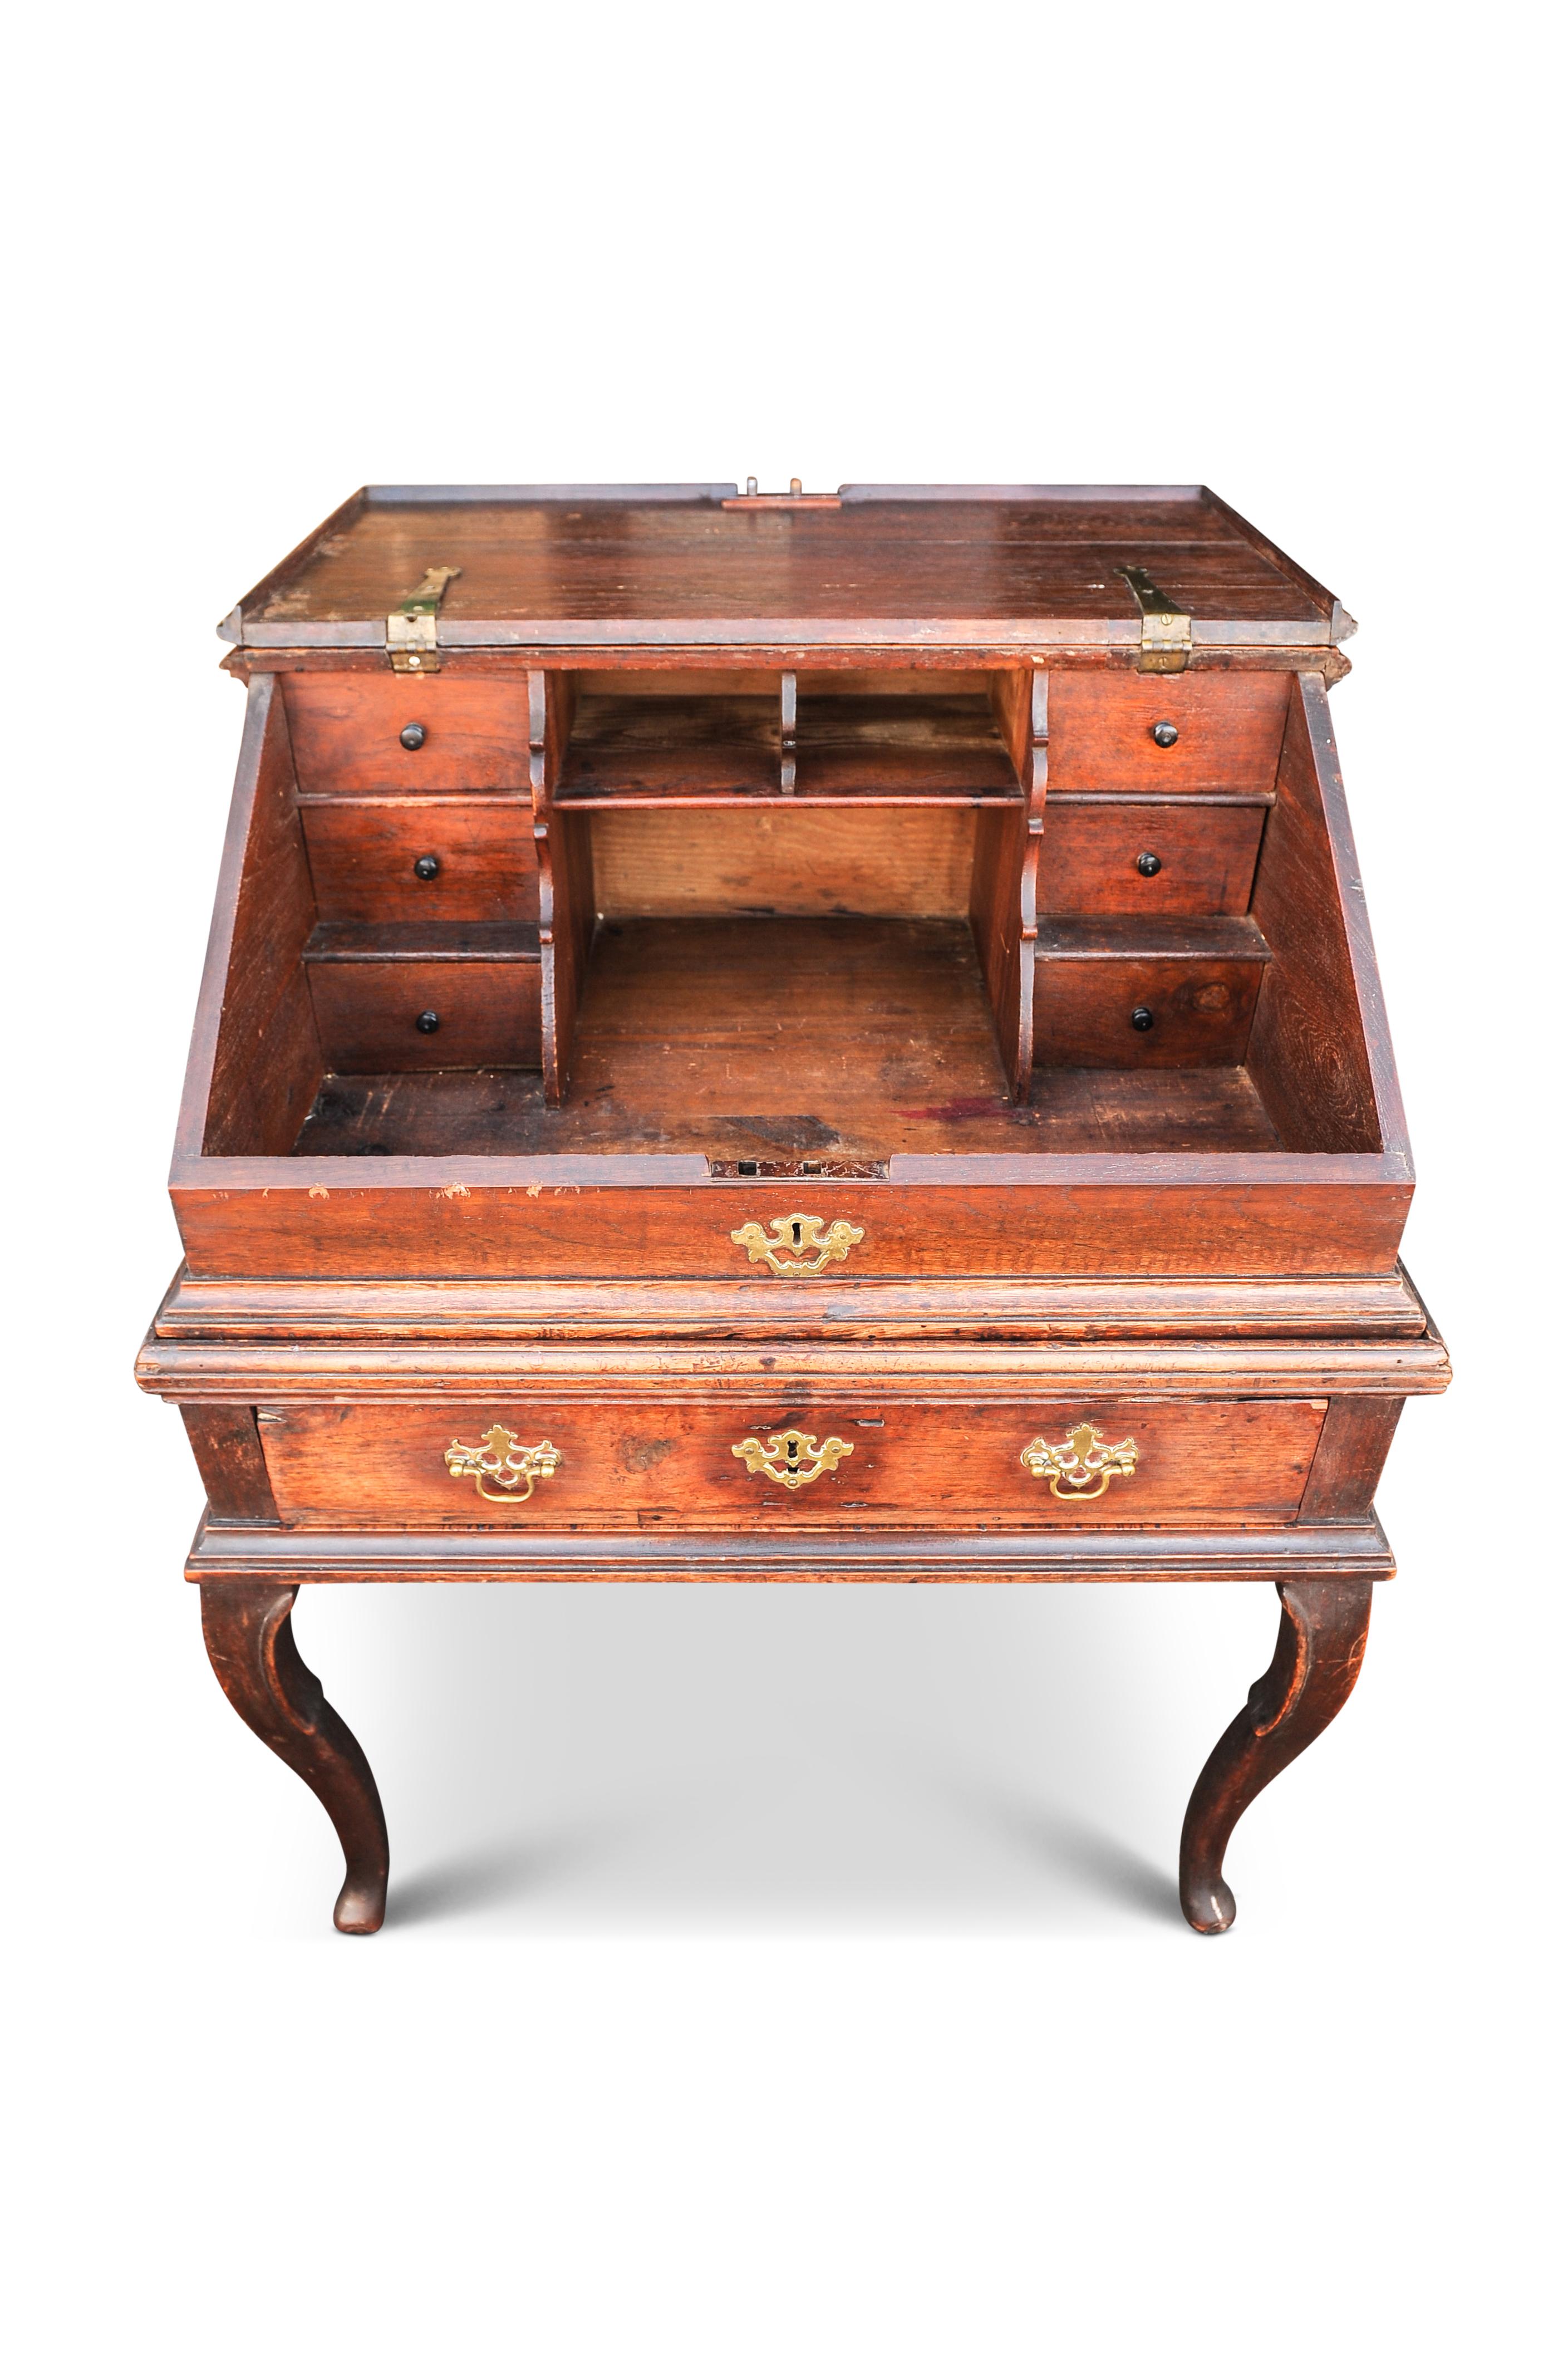 18th Century Georgian Bureau Desk on Stand. Fold Front Top Reveals A Fitted Interior with Drawers & Pigeonhole Sections Fitted out With Original Brass Batwing Handles & Finishes 1700's

The top section raised on single drawer base with cabriole